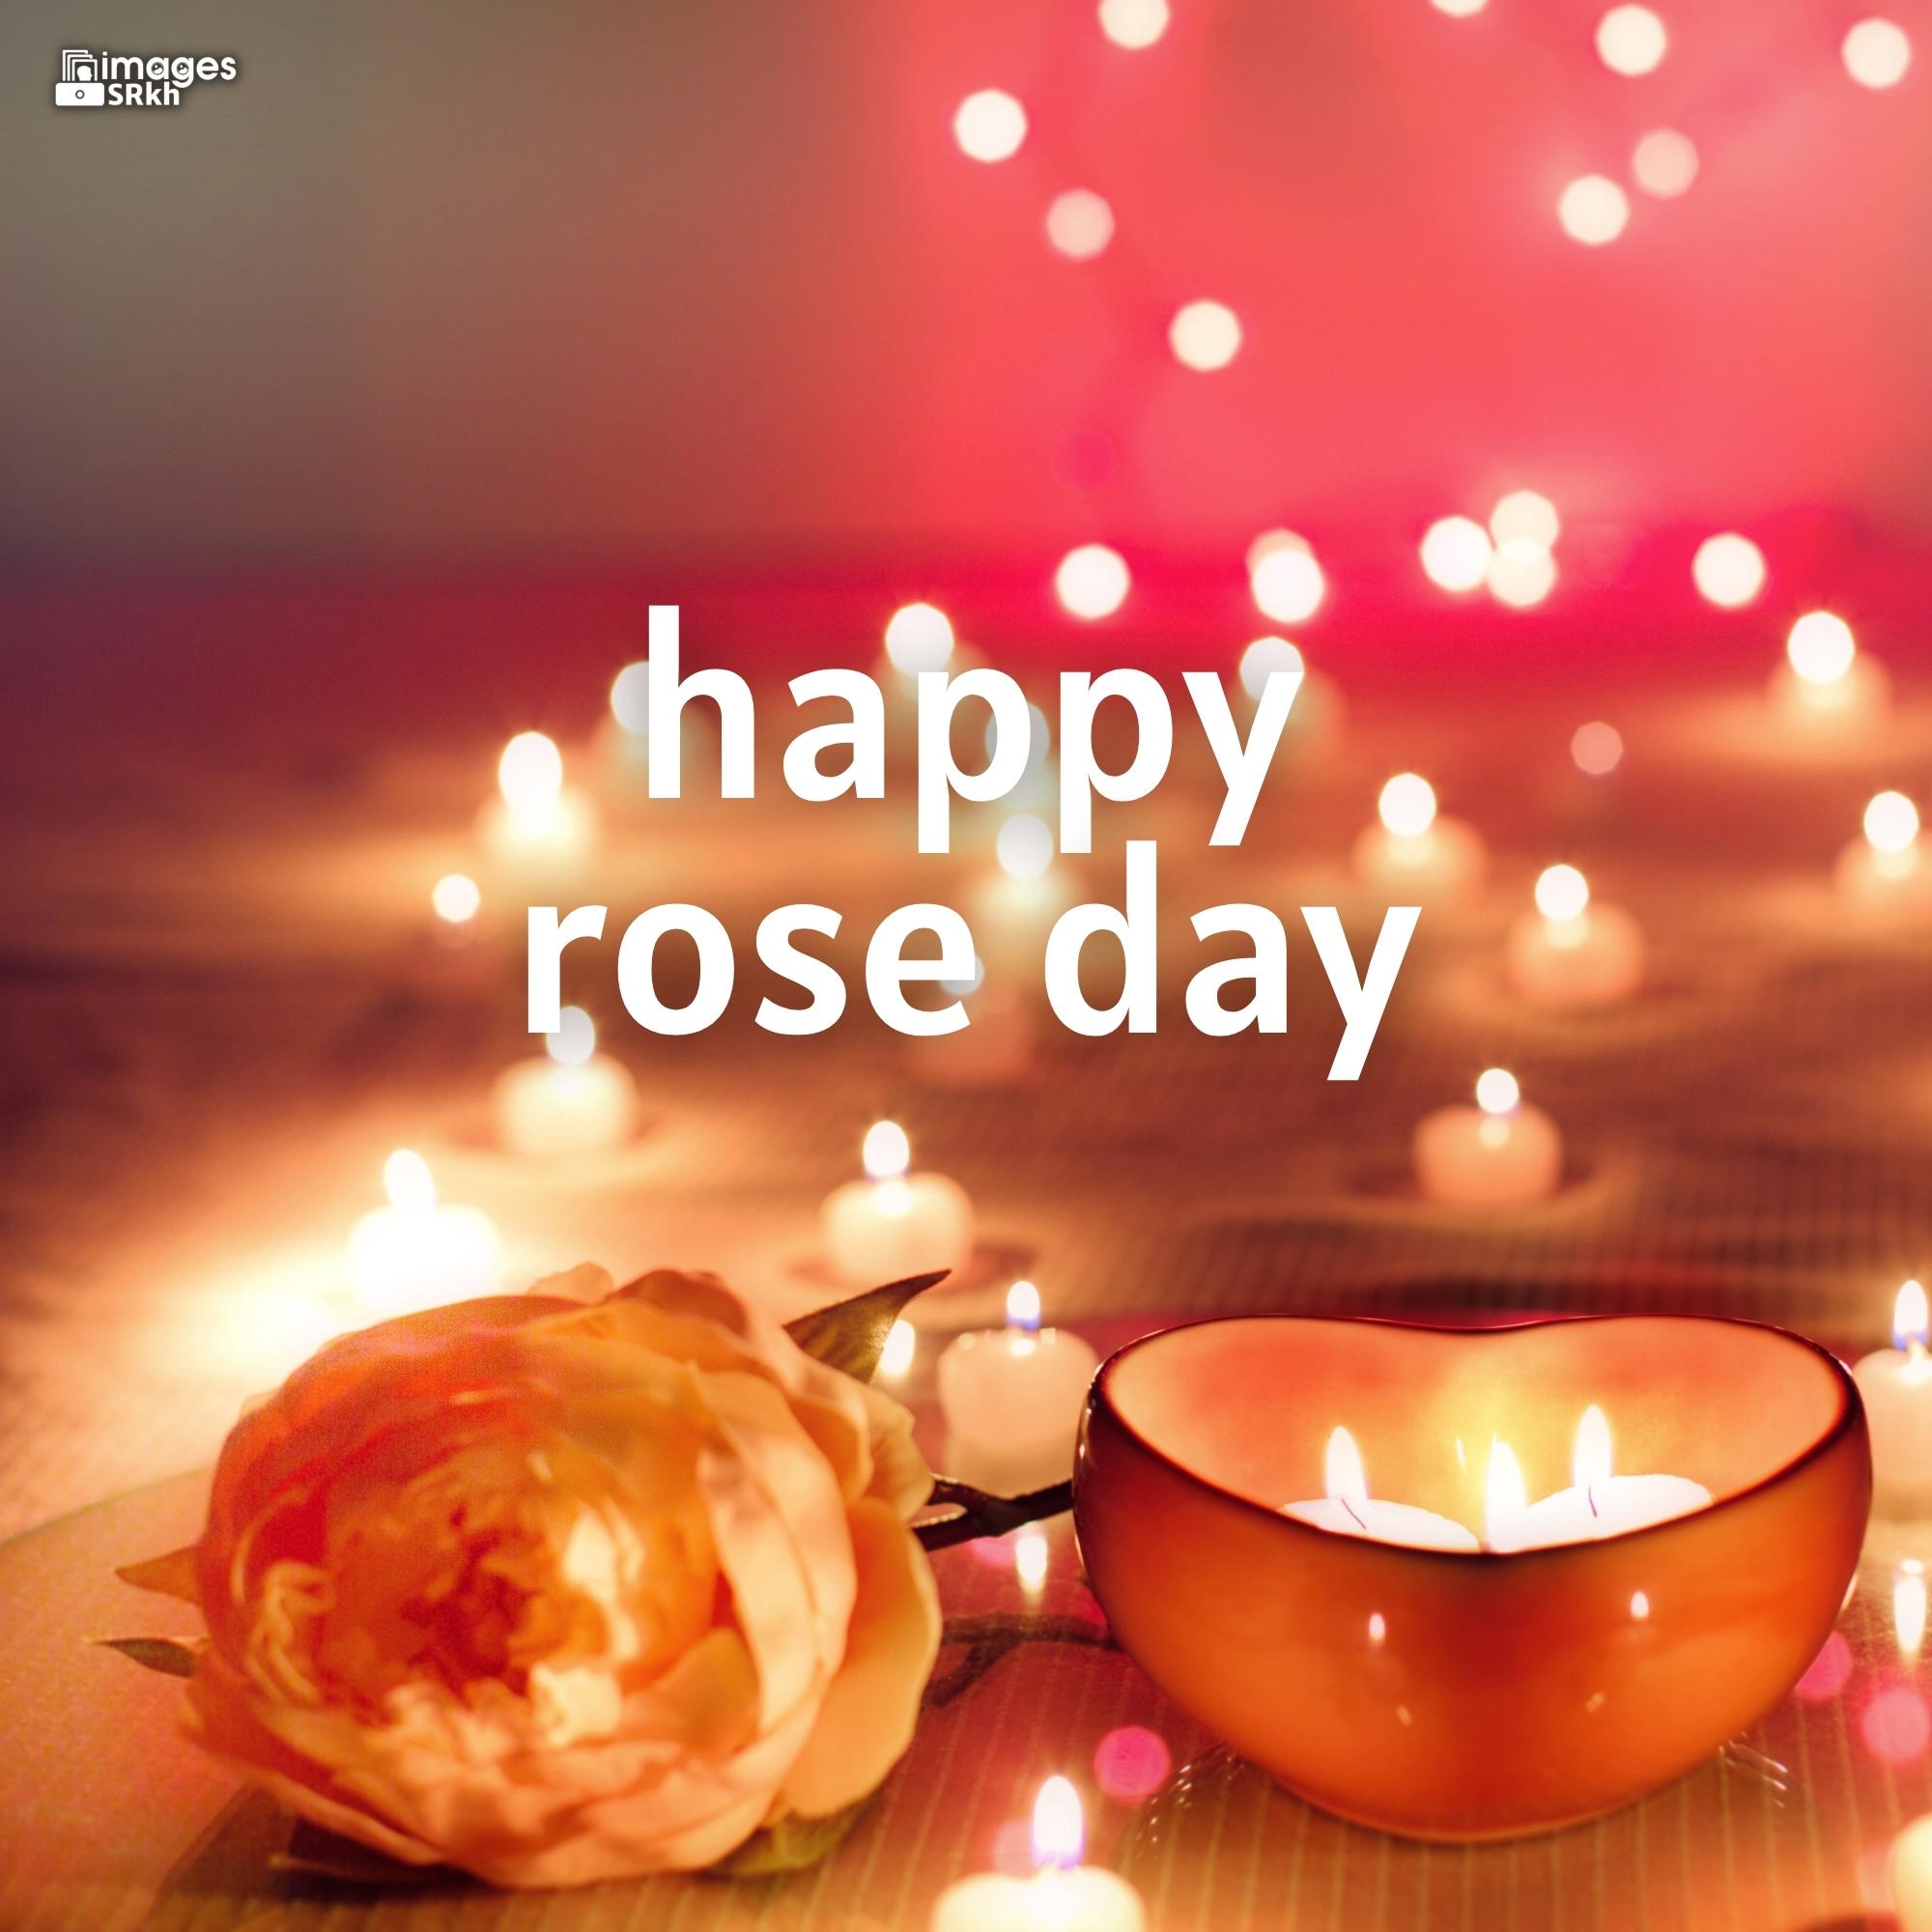 Happy Rose Day Image Hd Download (94)